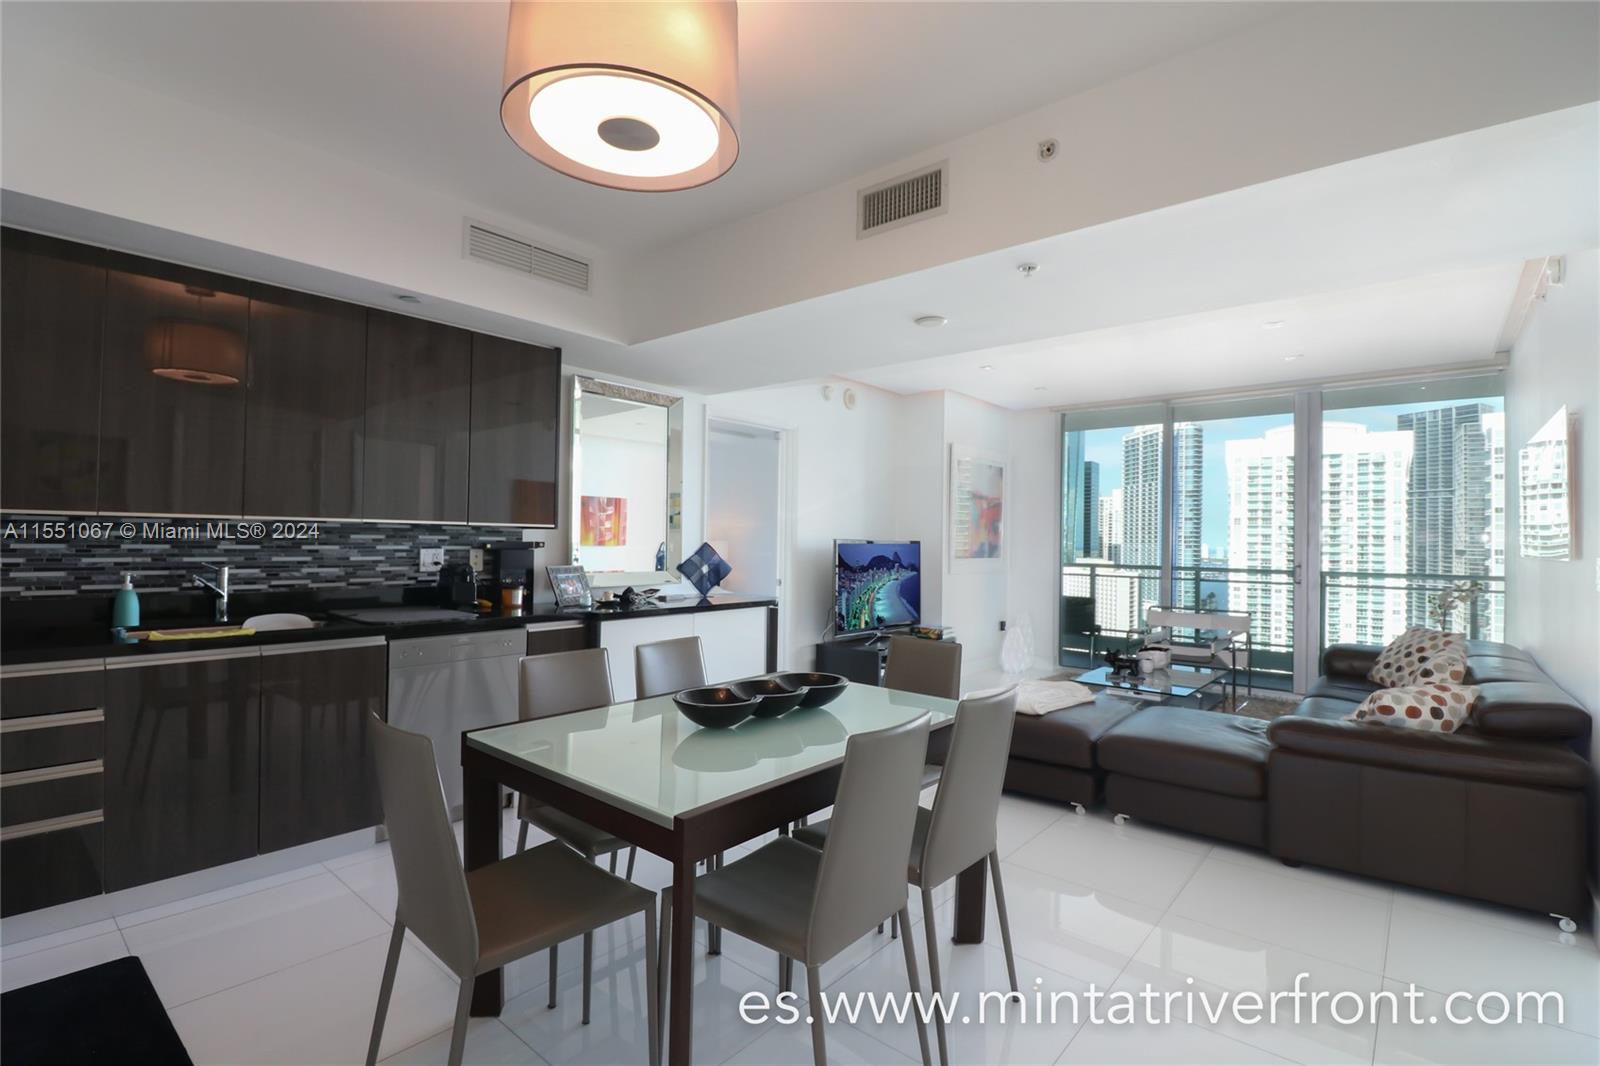 BEAUTIFUL APARTMENT LOCATED AT THE LUXURIOUS AND HIGH-END MINT BUILDING.FULLY RENOVATED WITH BUILT-IN CLOSETS, CERAMIC FLOORS, NEW EUROPEAN KITCHEN, SOFFITS, LED LIGHTS, AND MORE. BE PART OF THE RIVERFRONT COMMUNITY WHICH IS THE ONLY GATED COMMUNITY IN BRICKELL AREA. AVOID BRICKELL TRAFFIC IN THIS AMAZING LOCATION WITH IMMEDIATE ACCESS TO I-95 WHILE STILL BEING ABLE TO ENJOY ALL THAT BRICKELL HAS TO OFFER. BASIC CABLE AND HIGH-SPEED INTERNET INCLUDED IN THE RENT!